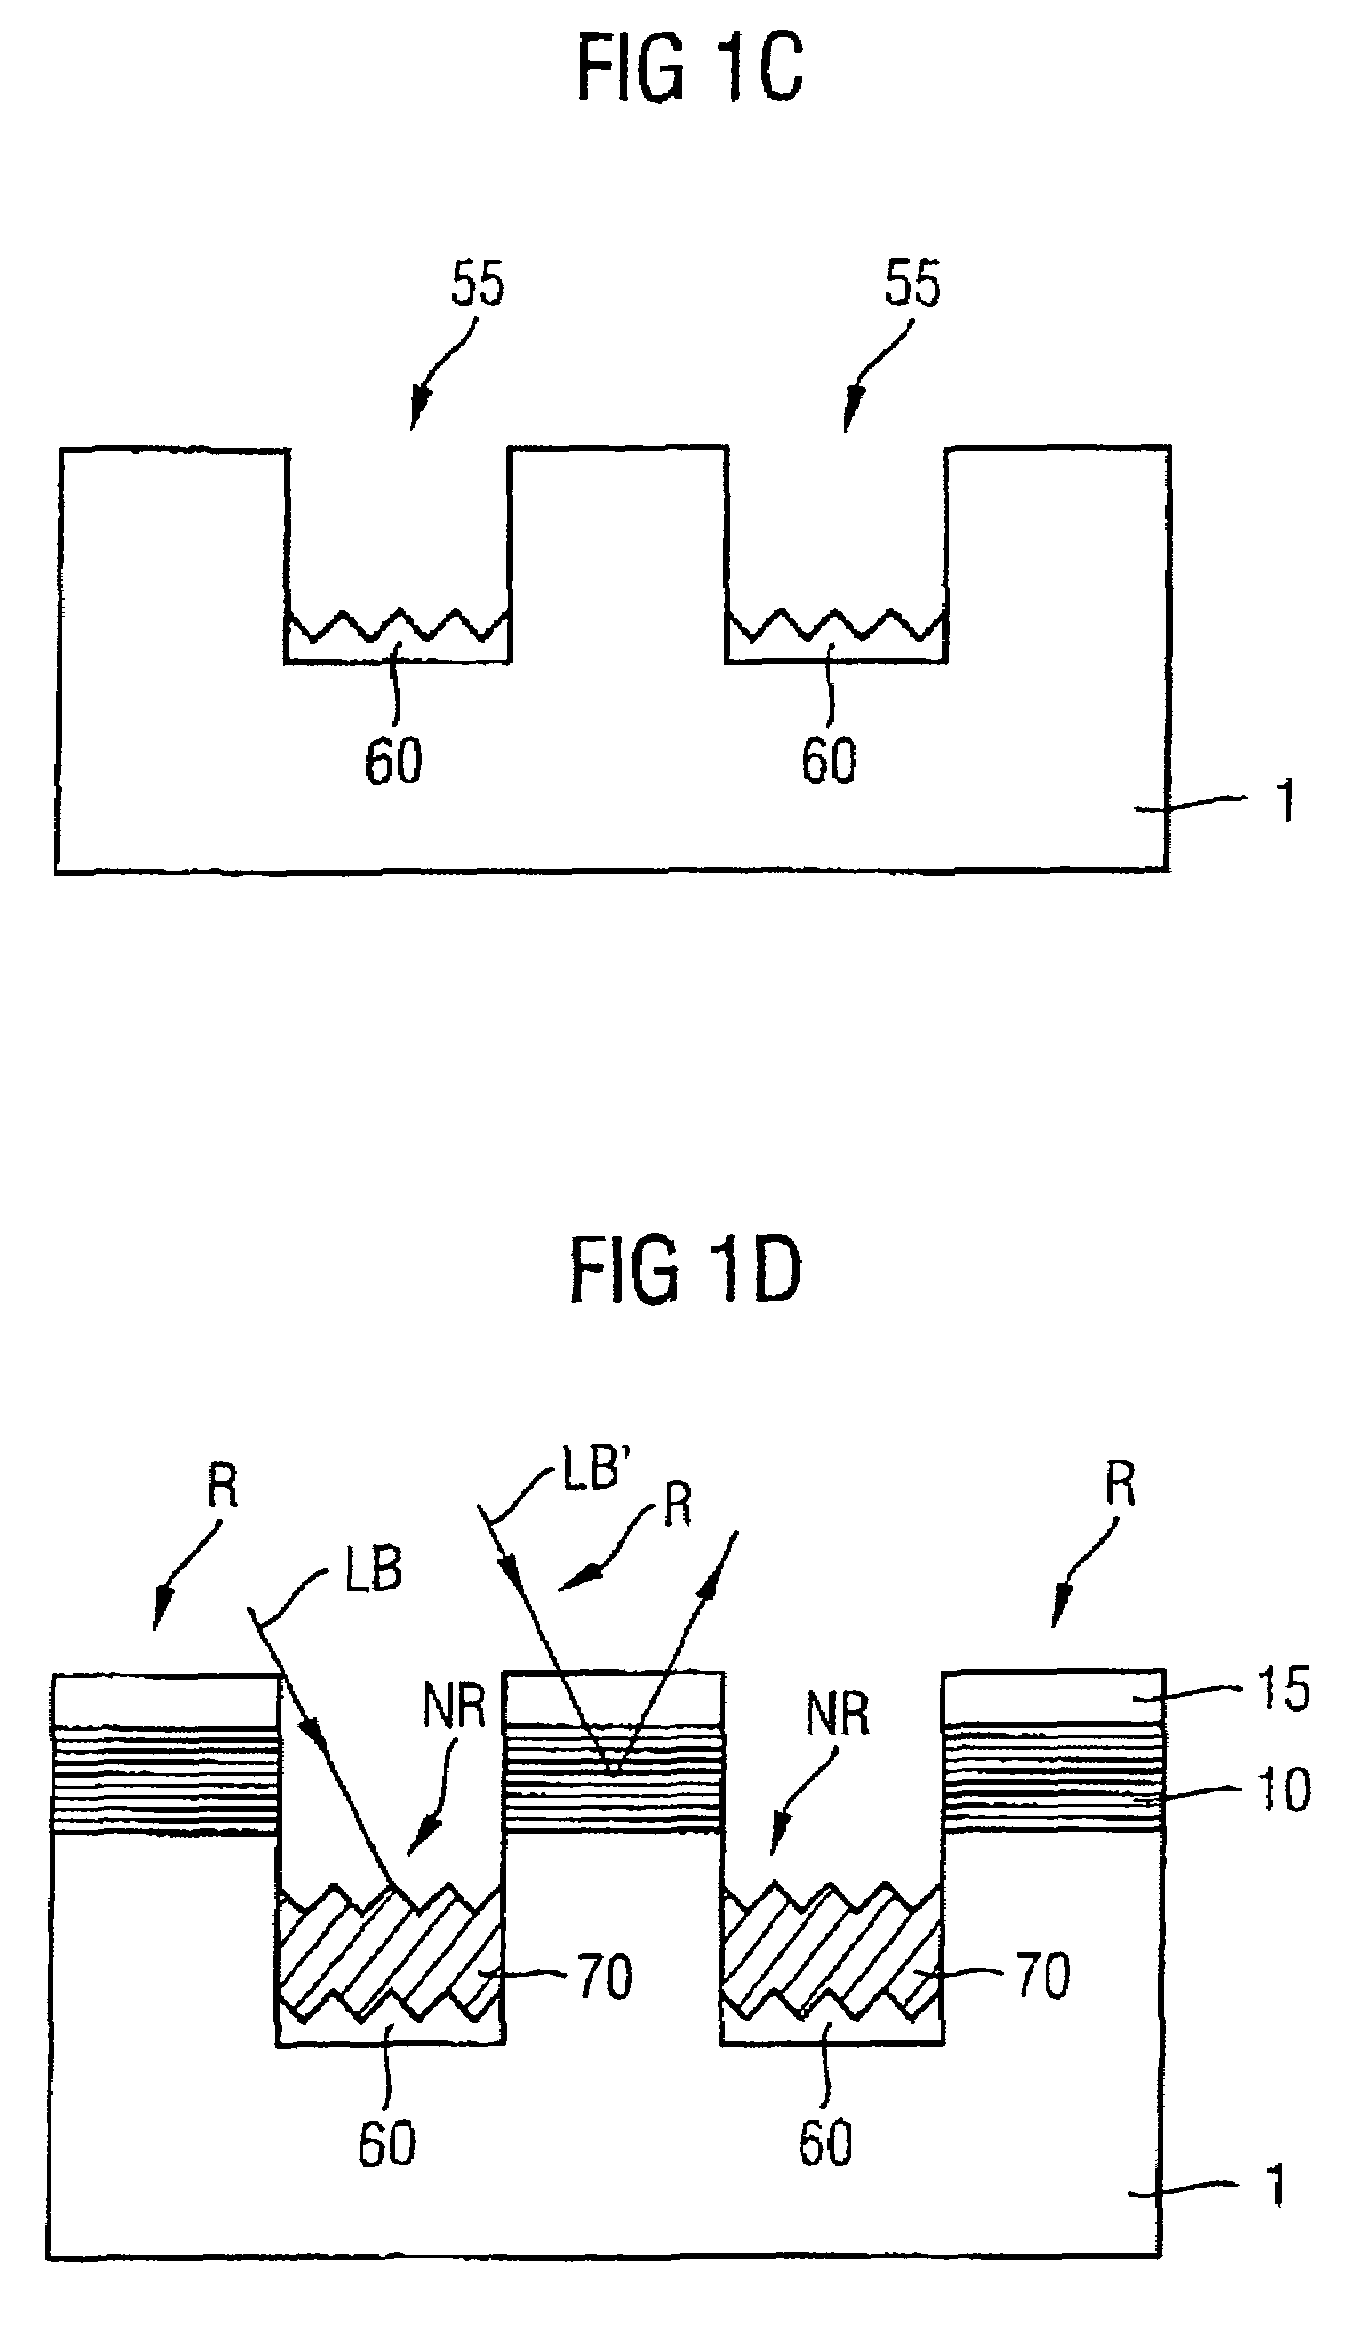 Method for fabricating a photomask for an integrated circuit and corresponding photomask